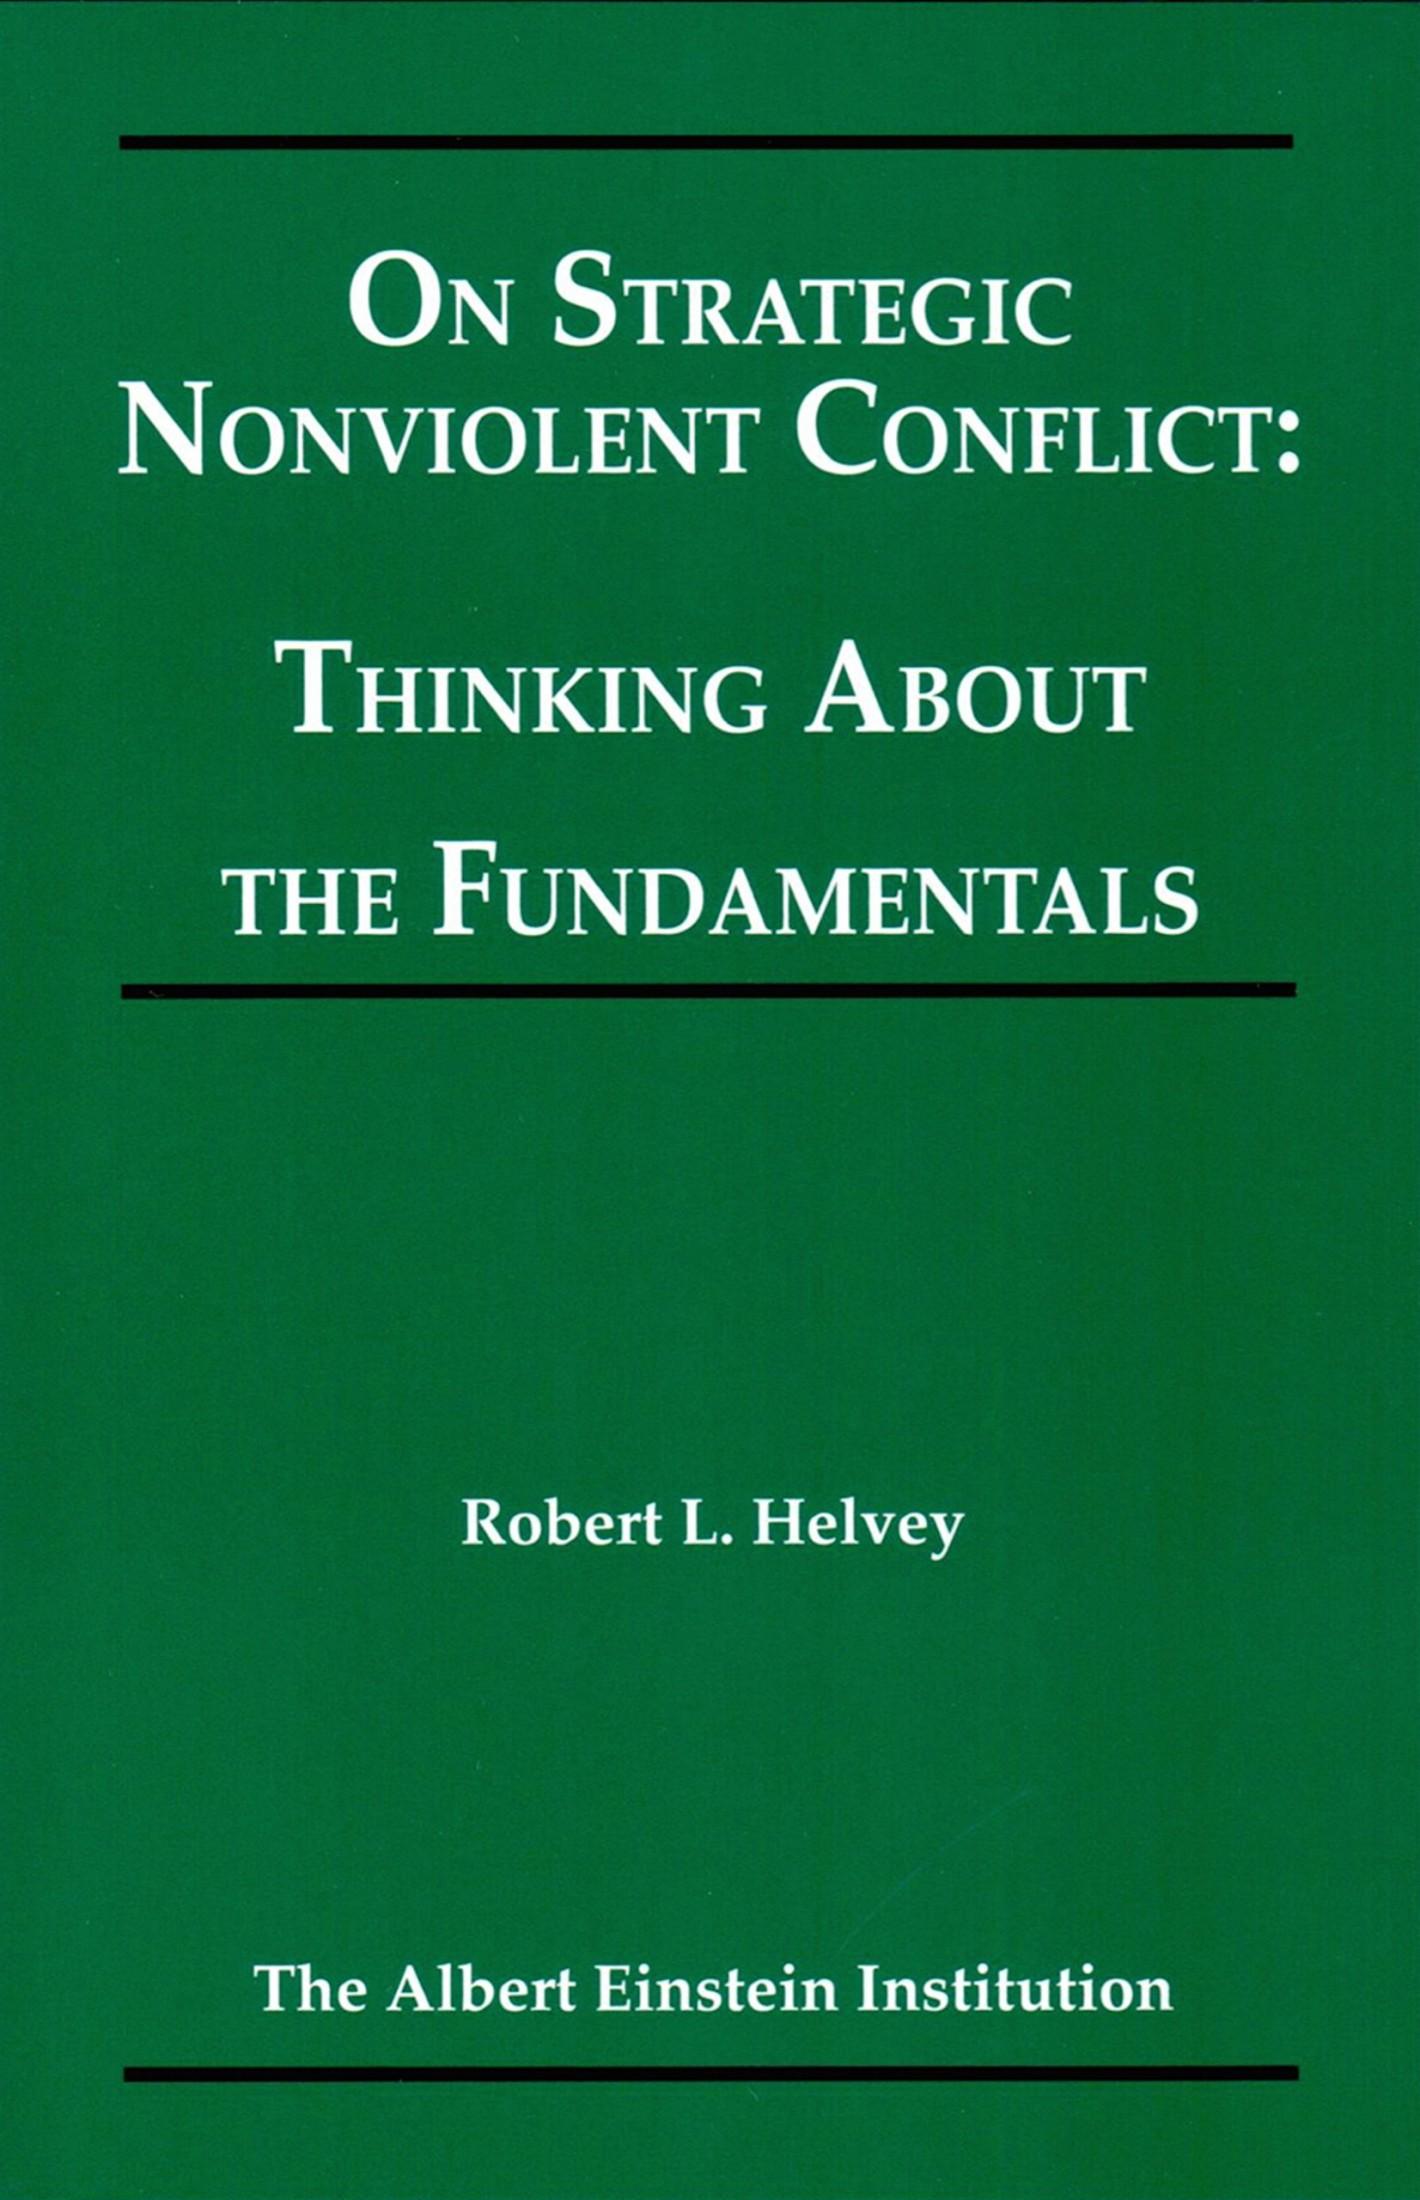 On Strategic Nonviolent Conflict (2004) by Robert Helvey